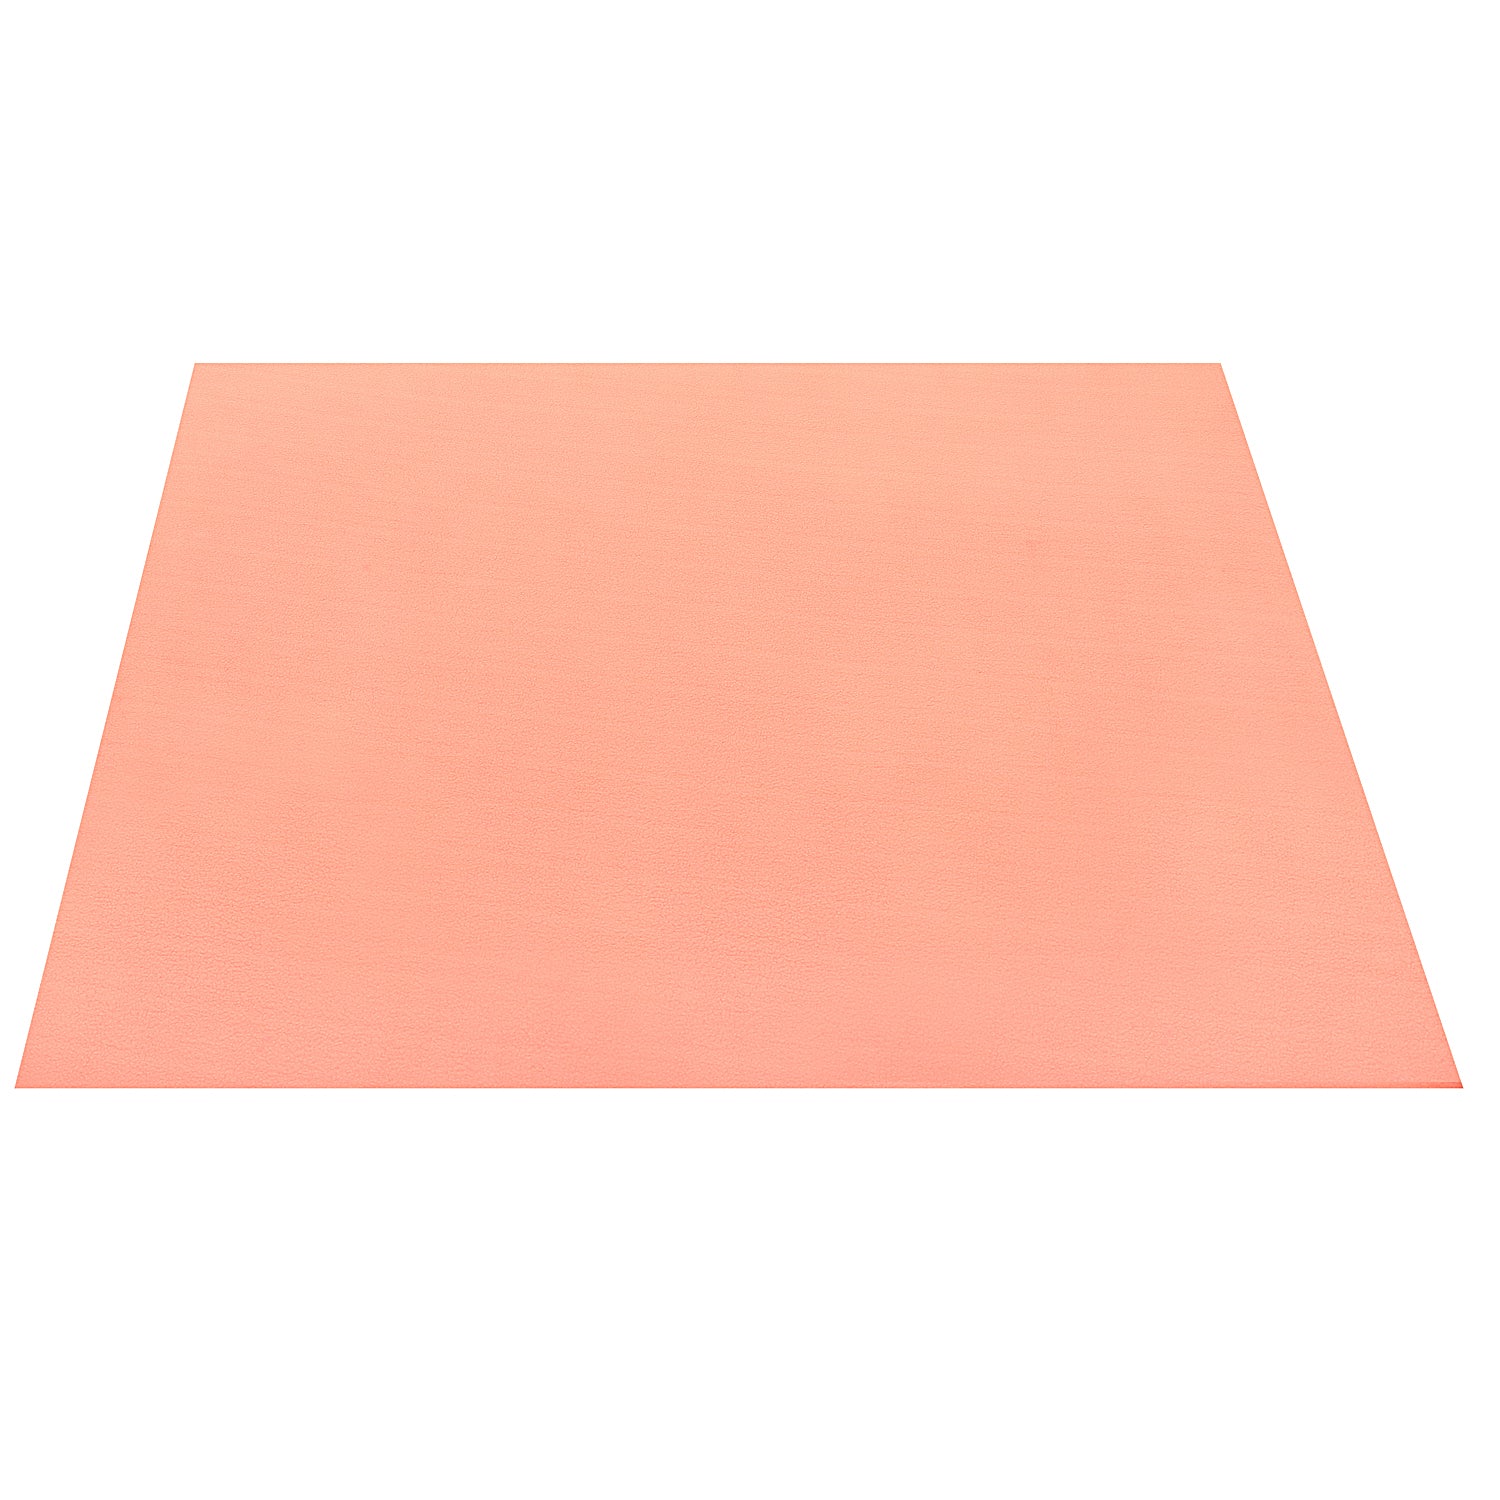 Plain Orange Small Water-Resistant Bed Protector